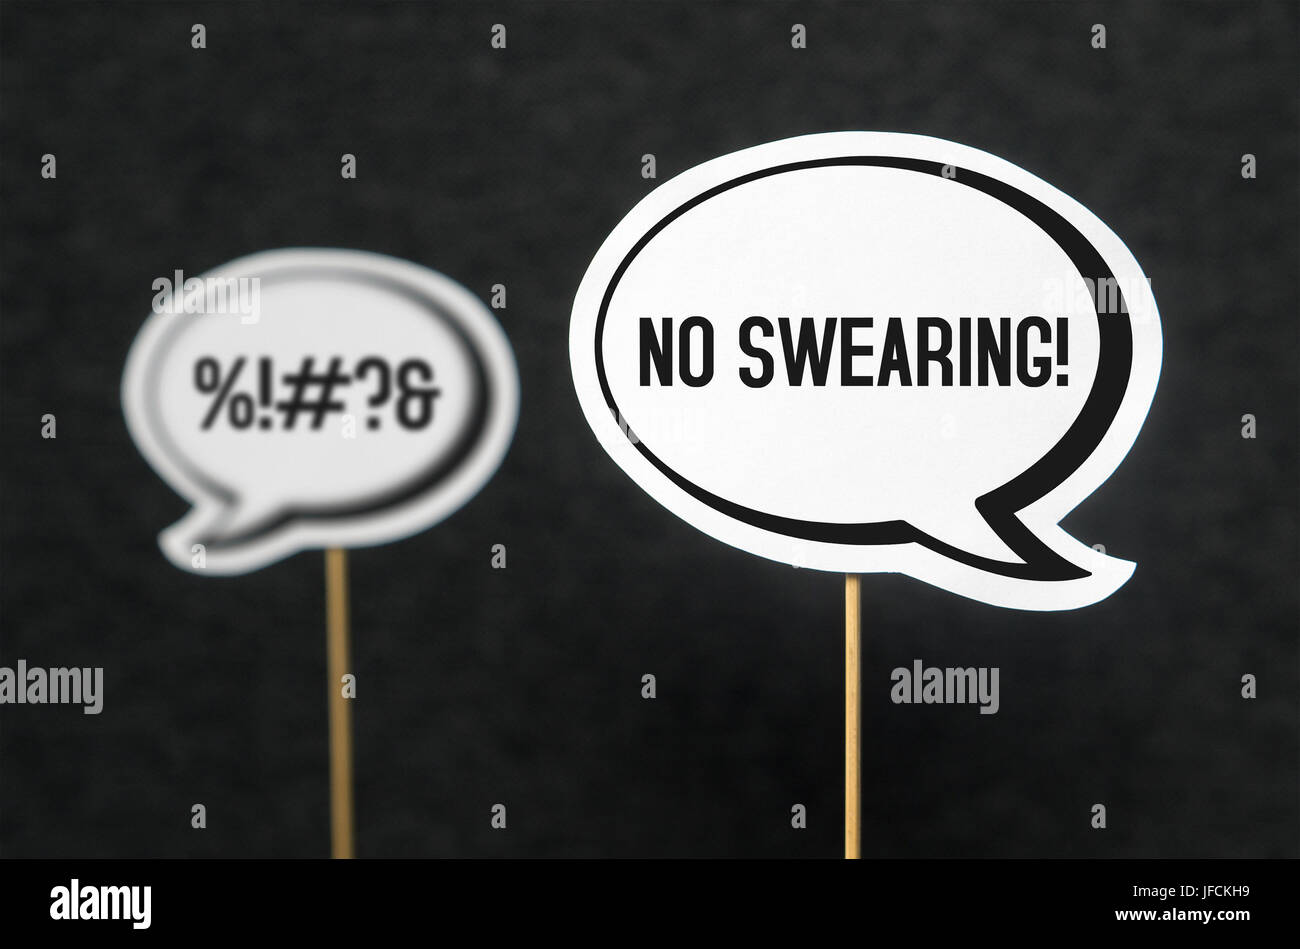 Swearing, cursing and bad language or behaviour in school, work or life. Speech bubble telling the other not to swear. Concept of no dirty words. Stock Photo